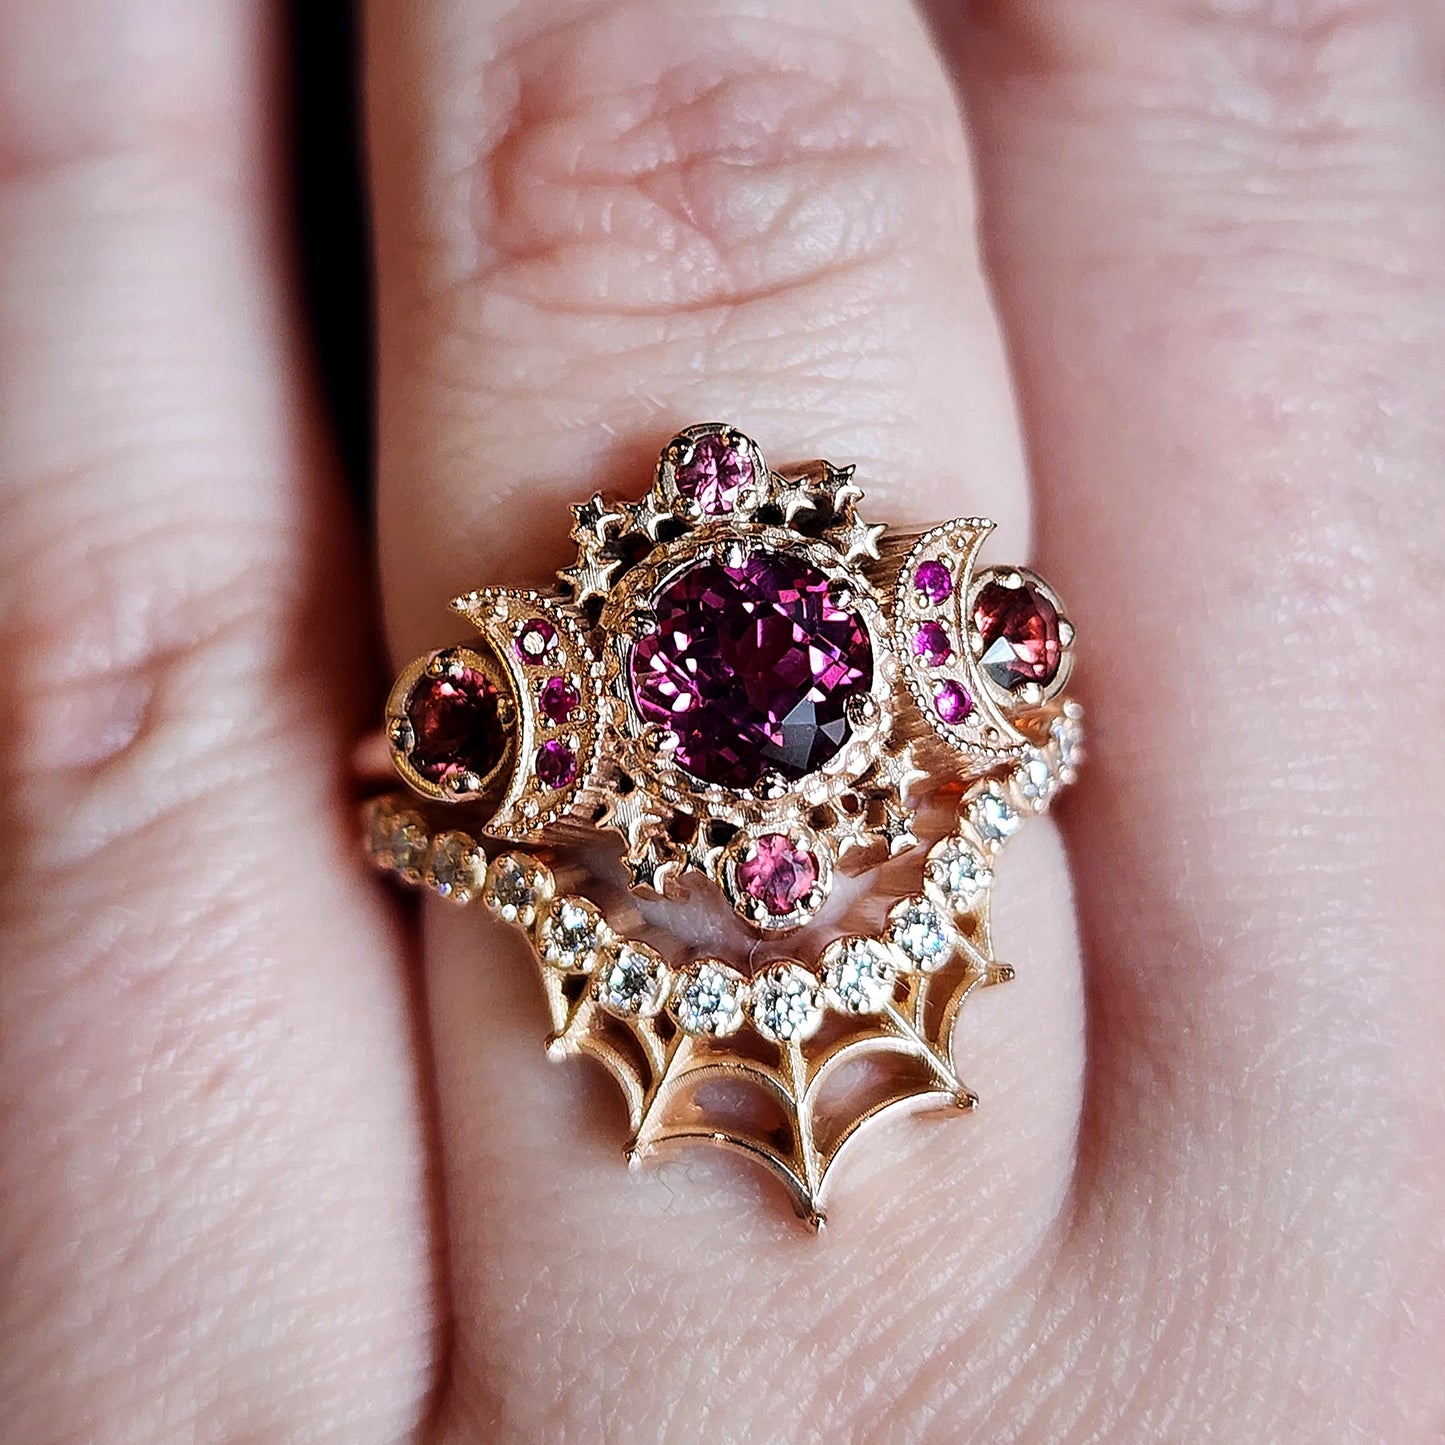 Load image into Gallery viewer, rhodolite imperial garnet cosmos ruby red sapphire engagement ring alternative bride 14k gold
